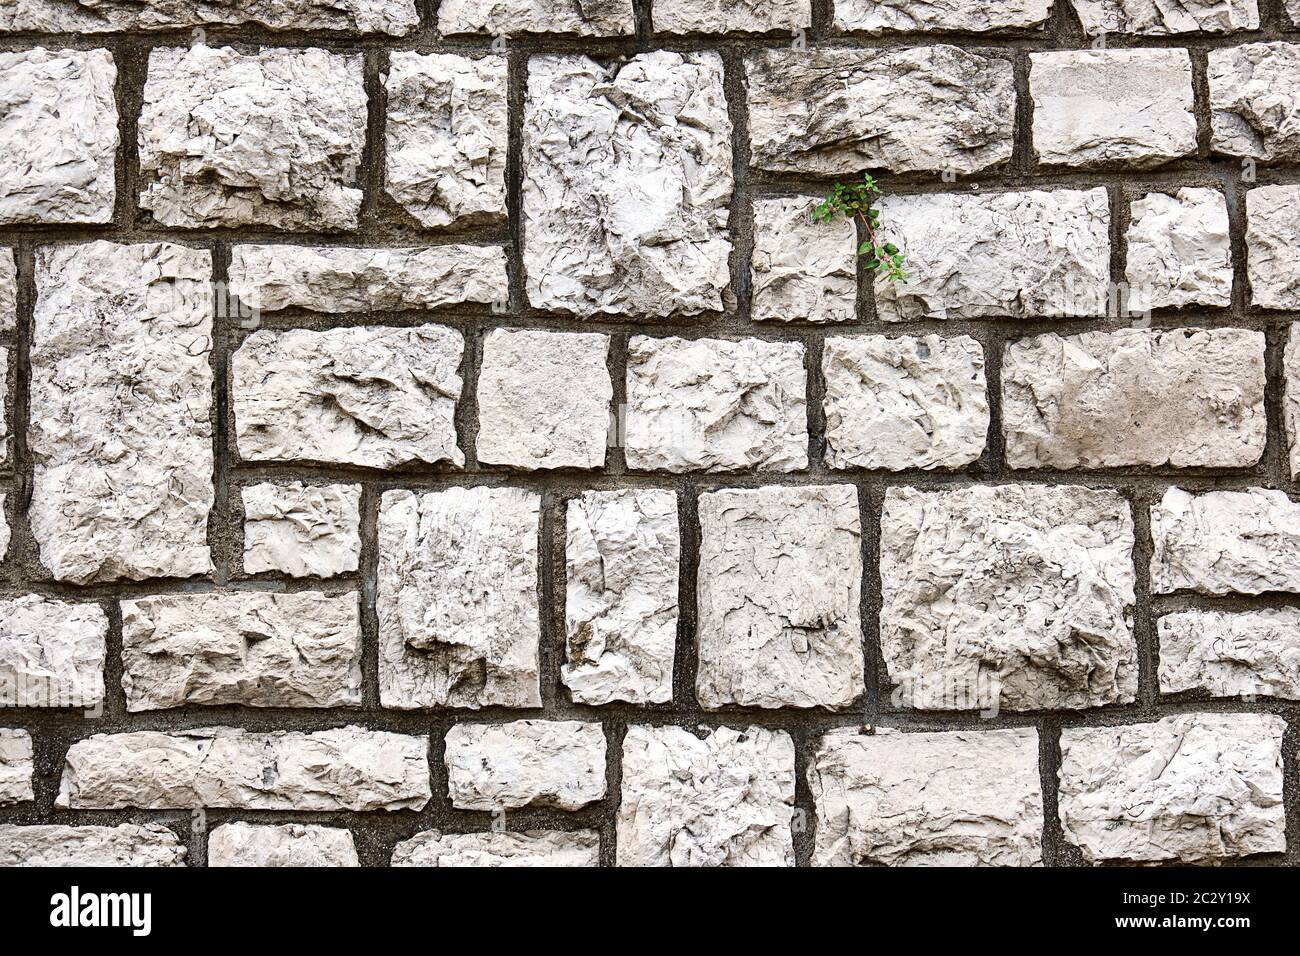 Background from a wall made of block shaped old natural stones Stock Photo